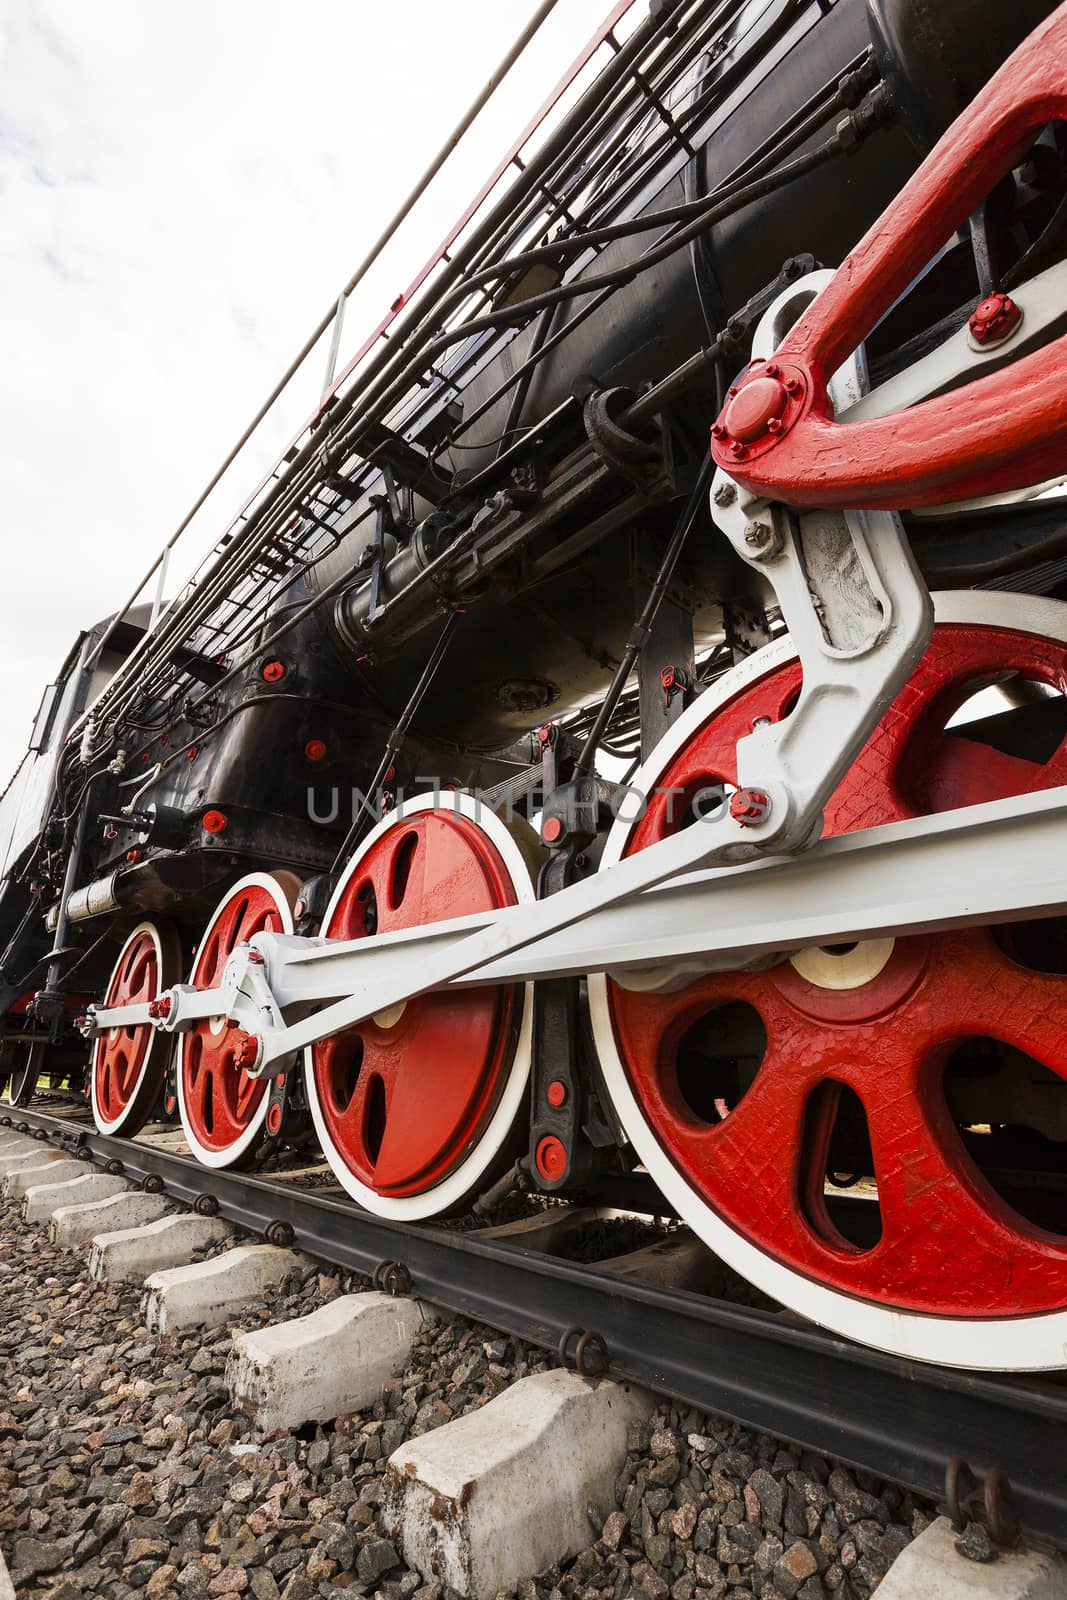 wheels of the old train   by avq